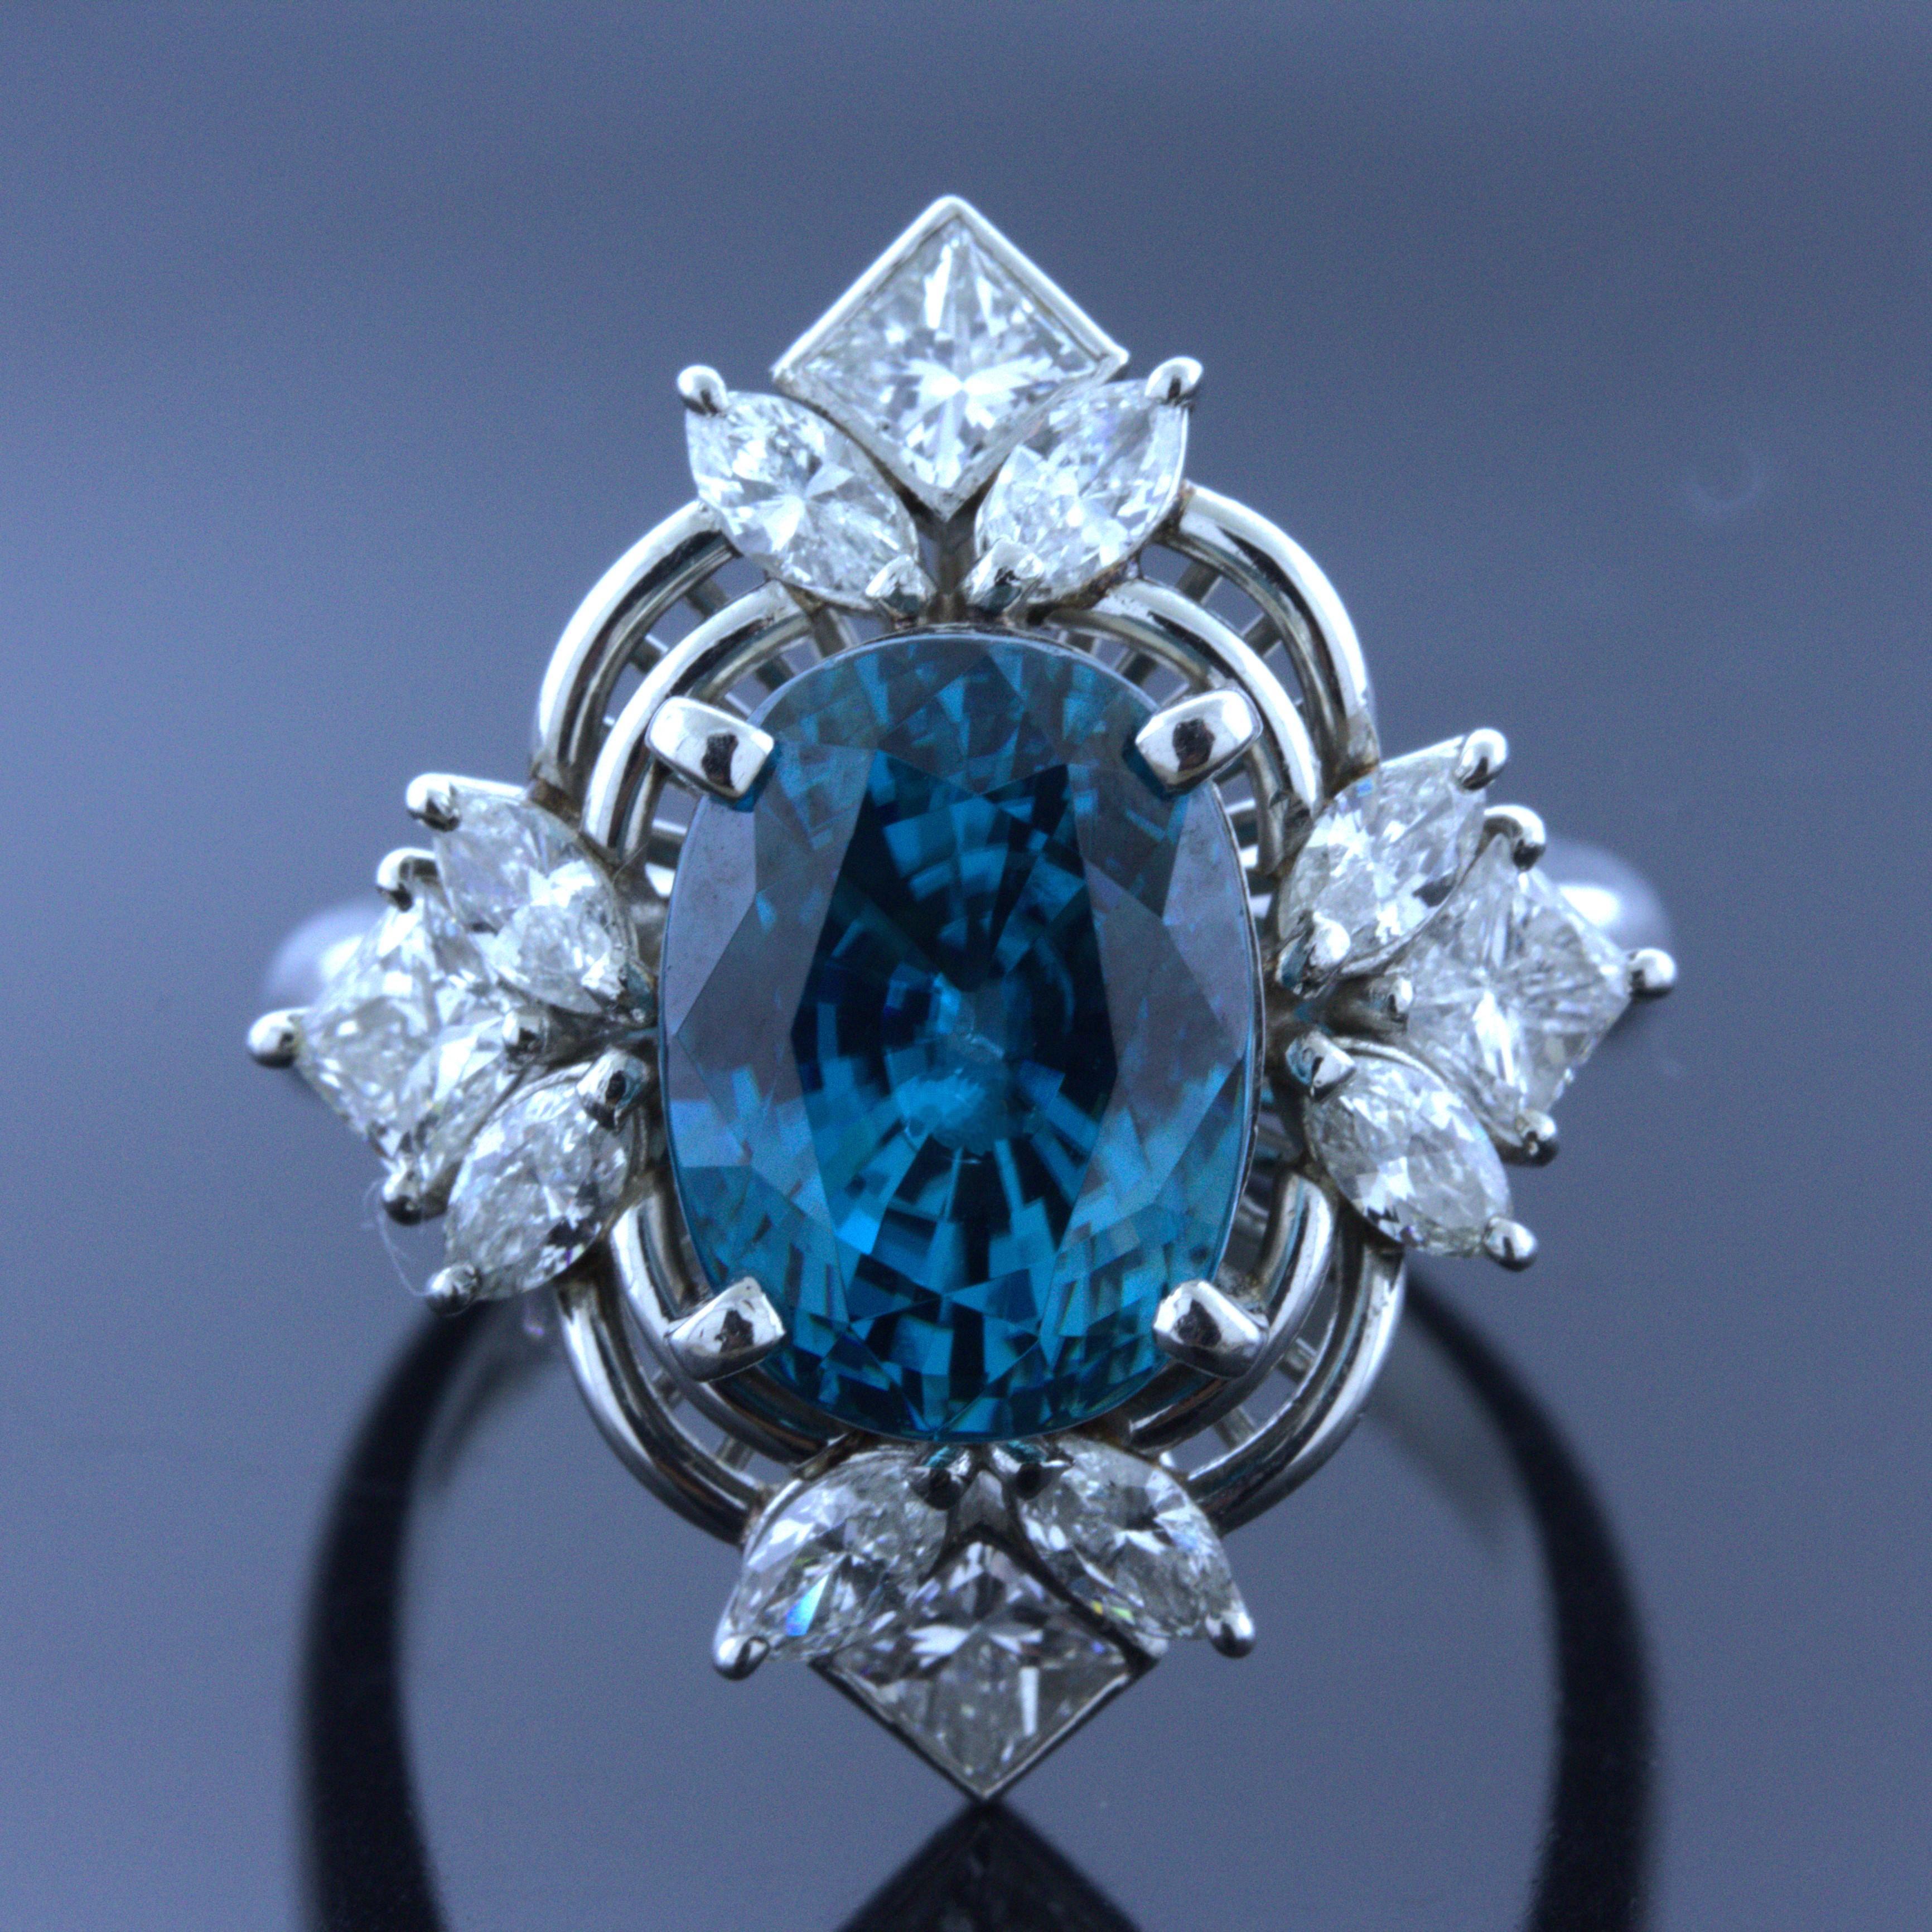 A lovely platinum ring featuring a large and vibrant blue zircon. It weighs an impressive 10.28 carats while having an intense blue color along with excellent brilliance and fire, (more than diamond) giving it a scintillating look. It is